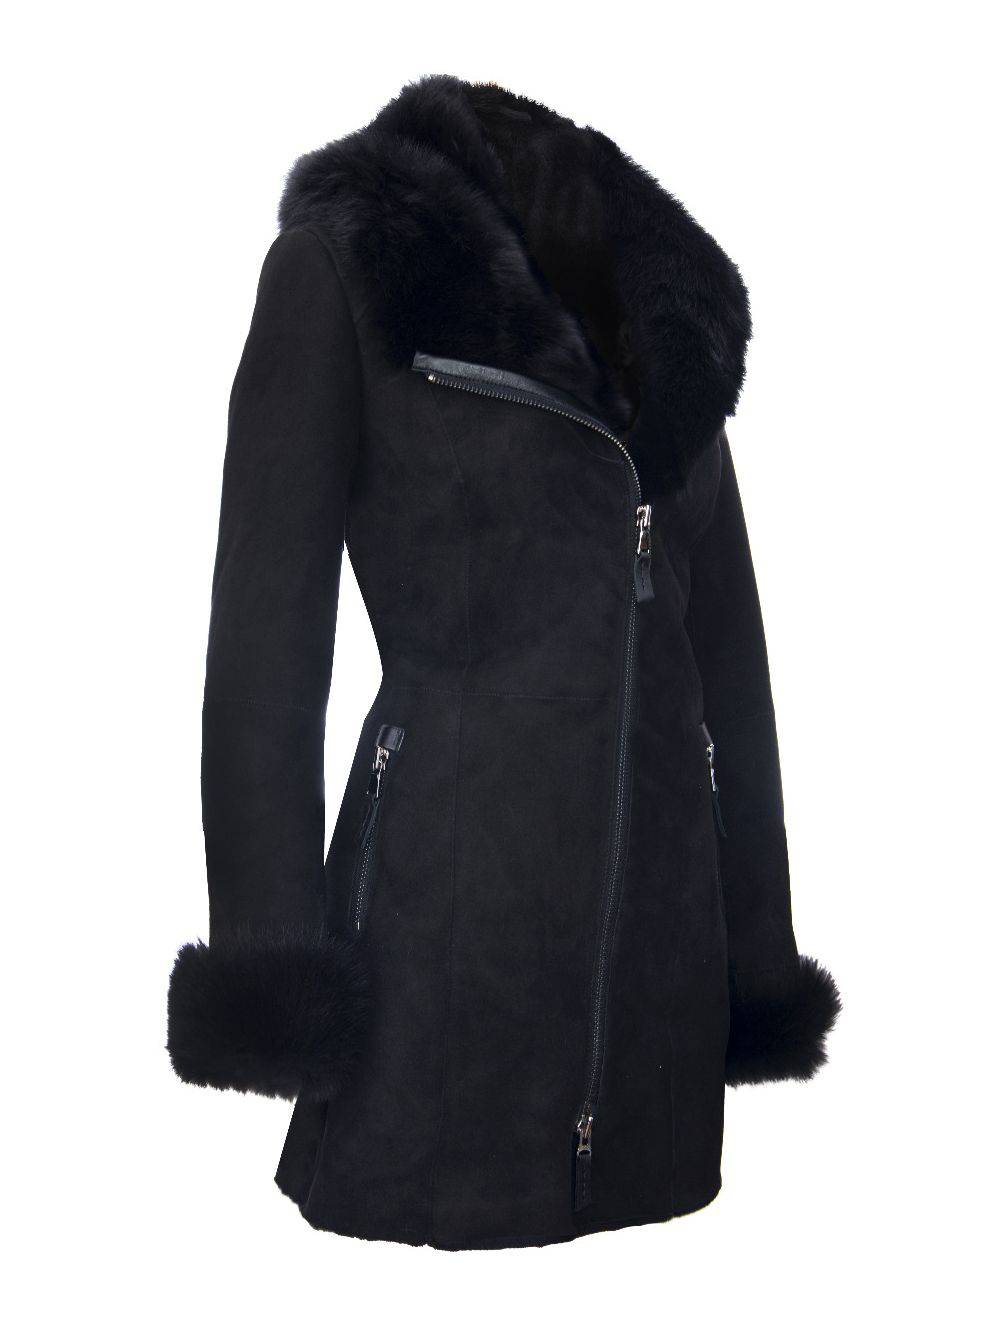 Ladies Black Suede Sheepskin Hooded Coat - Millycap for sale - Woodcock and Cavendish